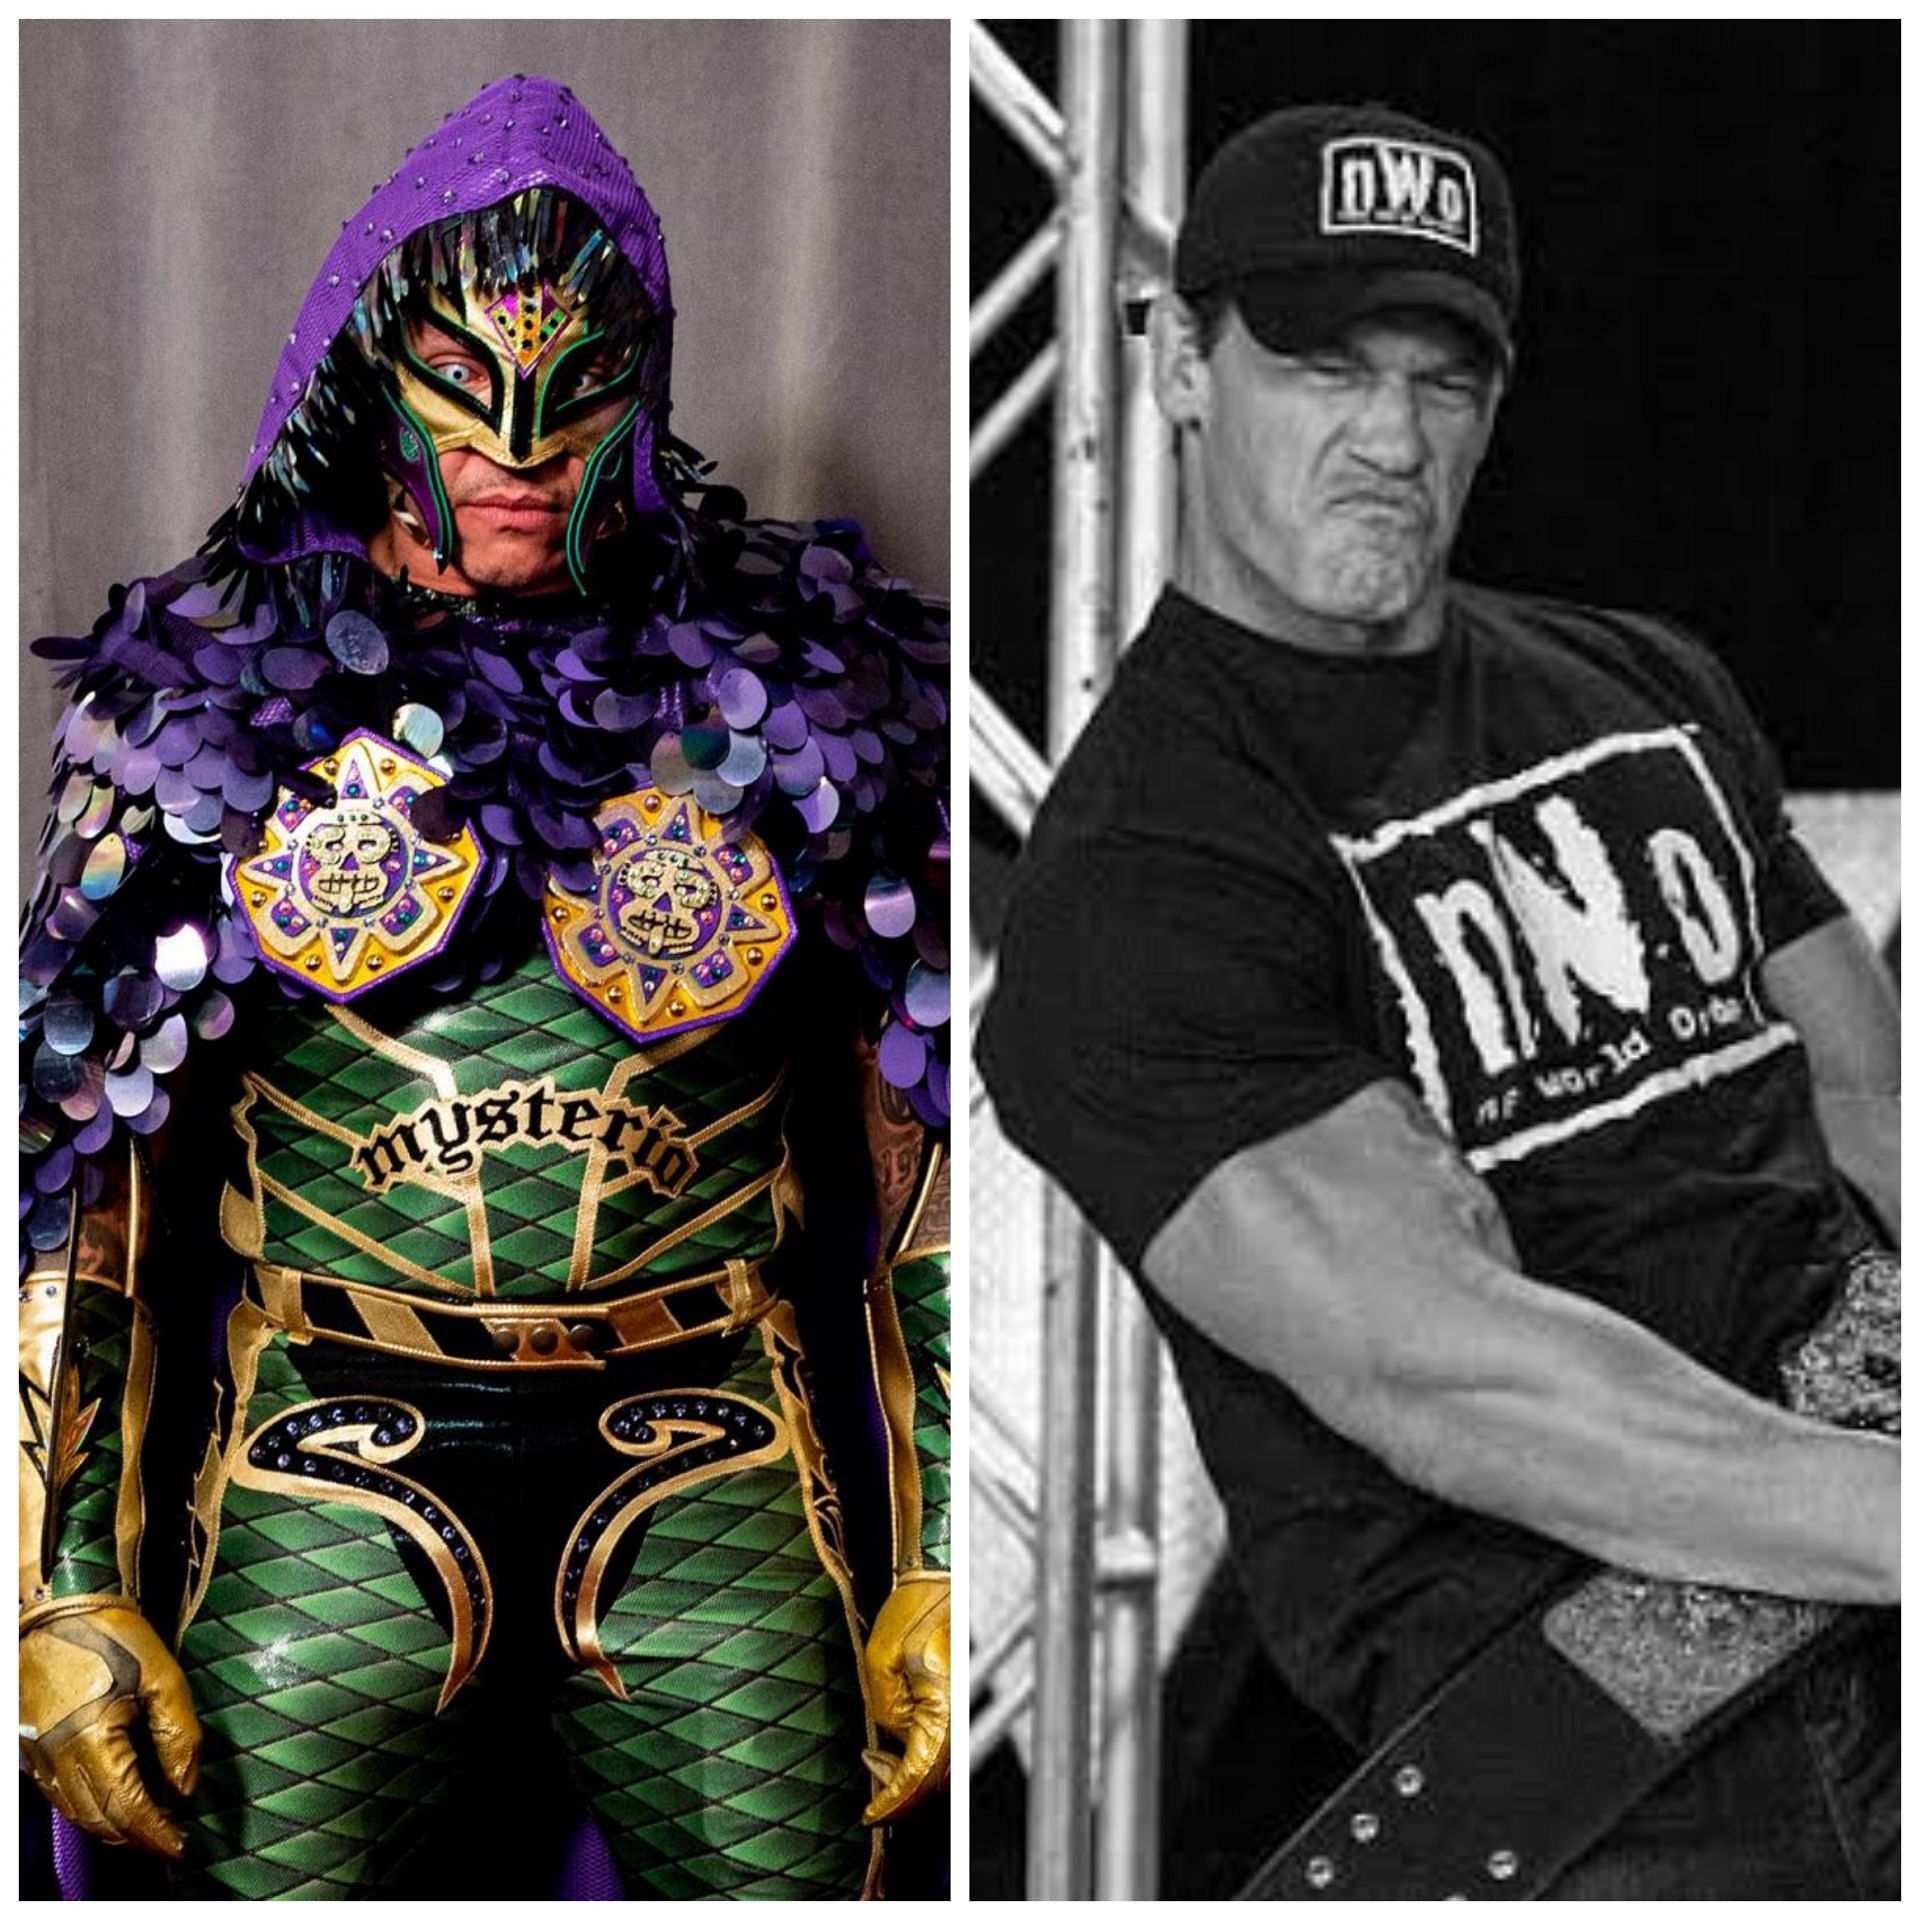 John Cena and Rey Mysterio are two legends of WWE